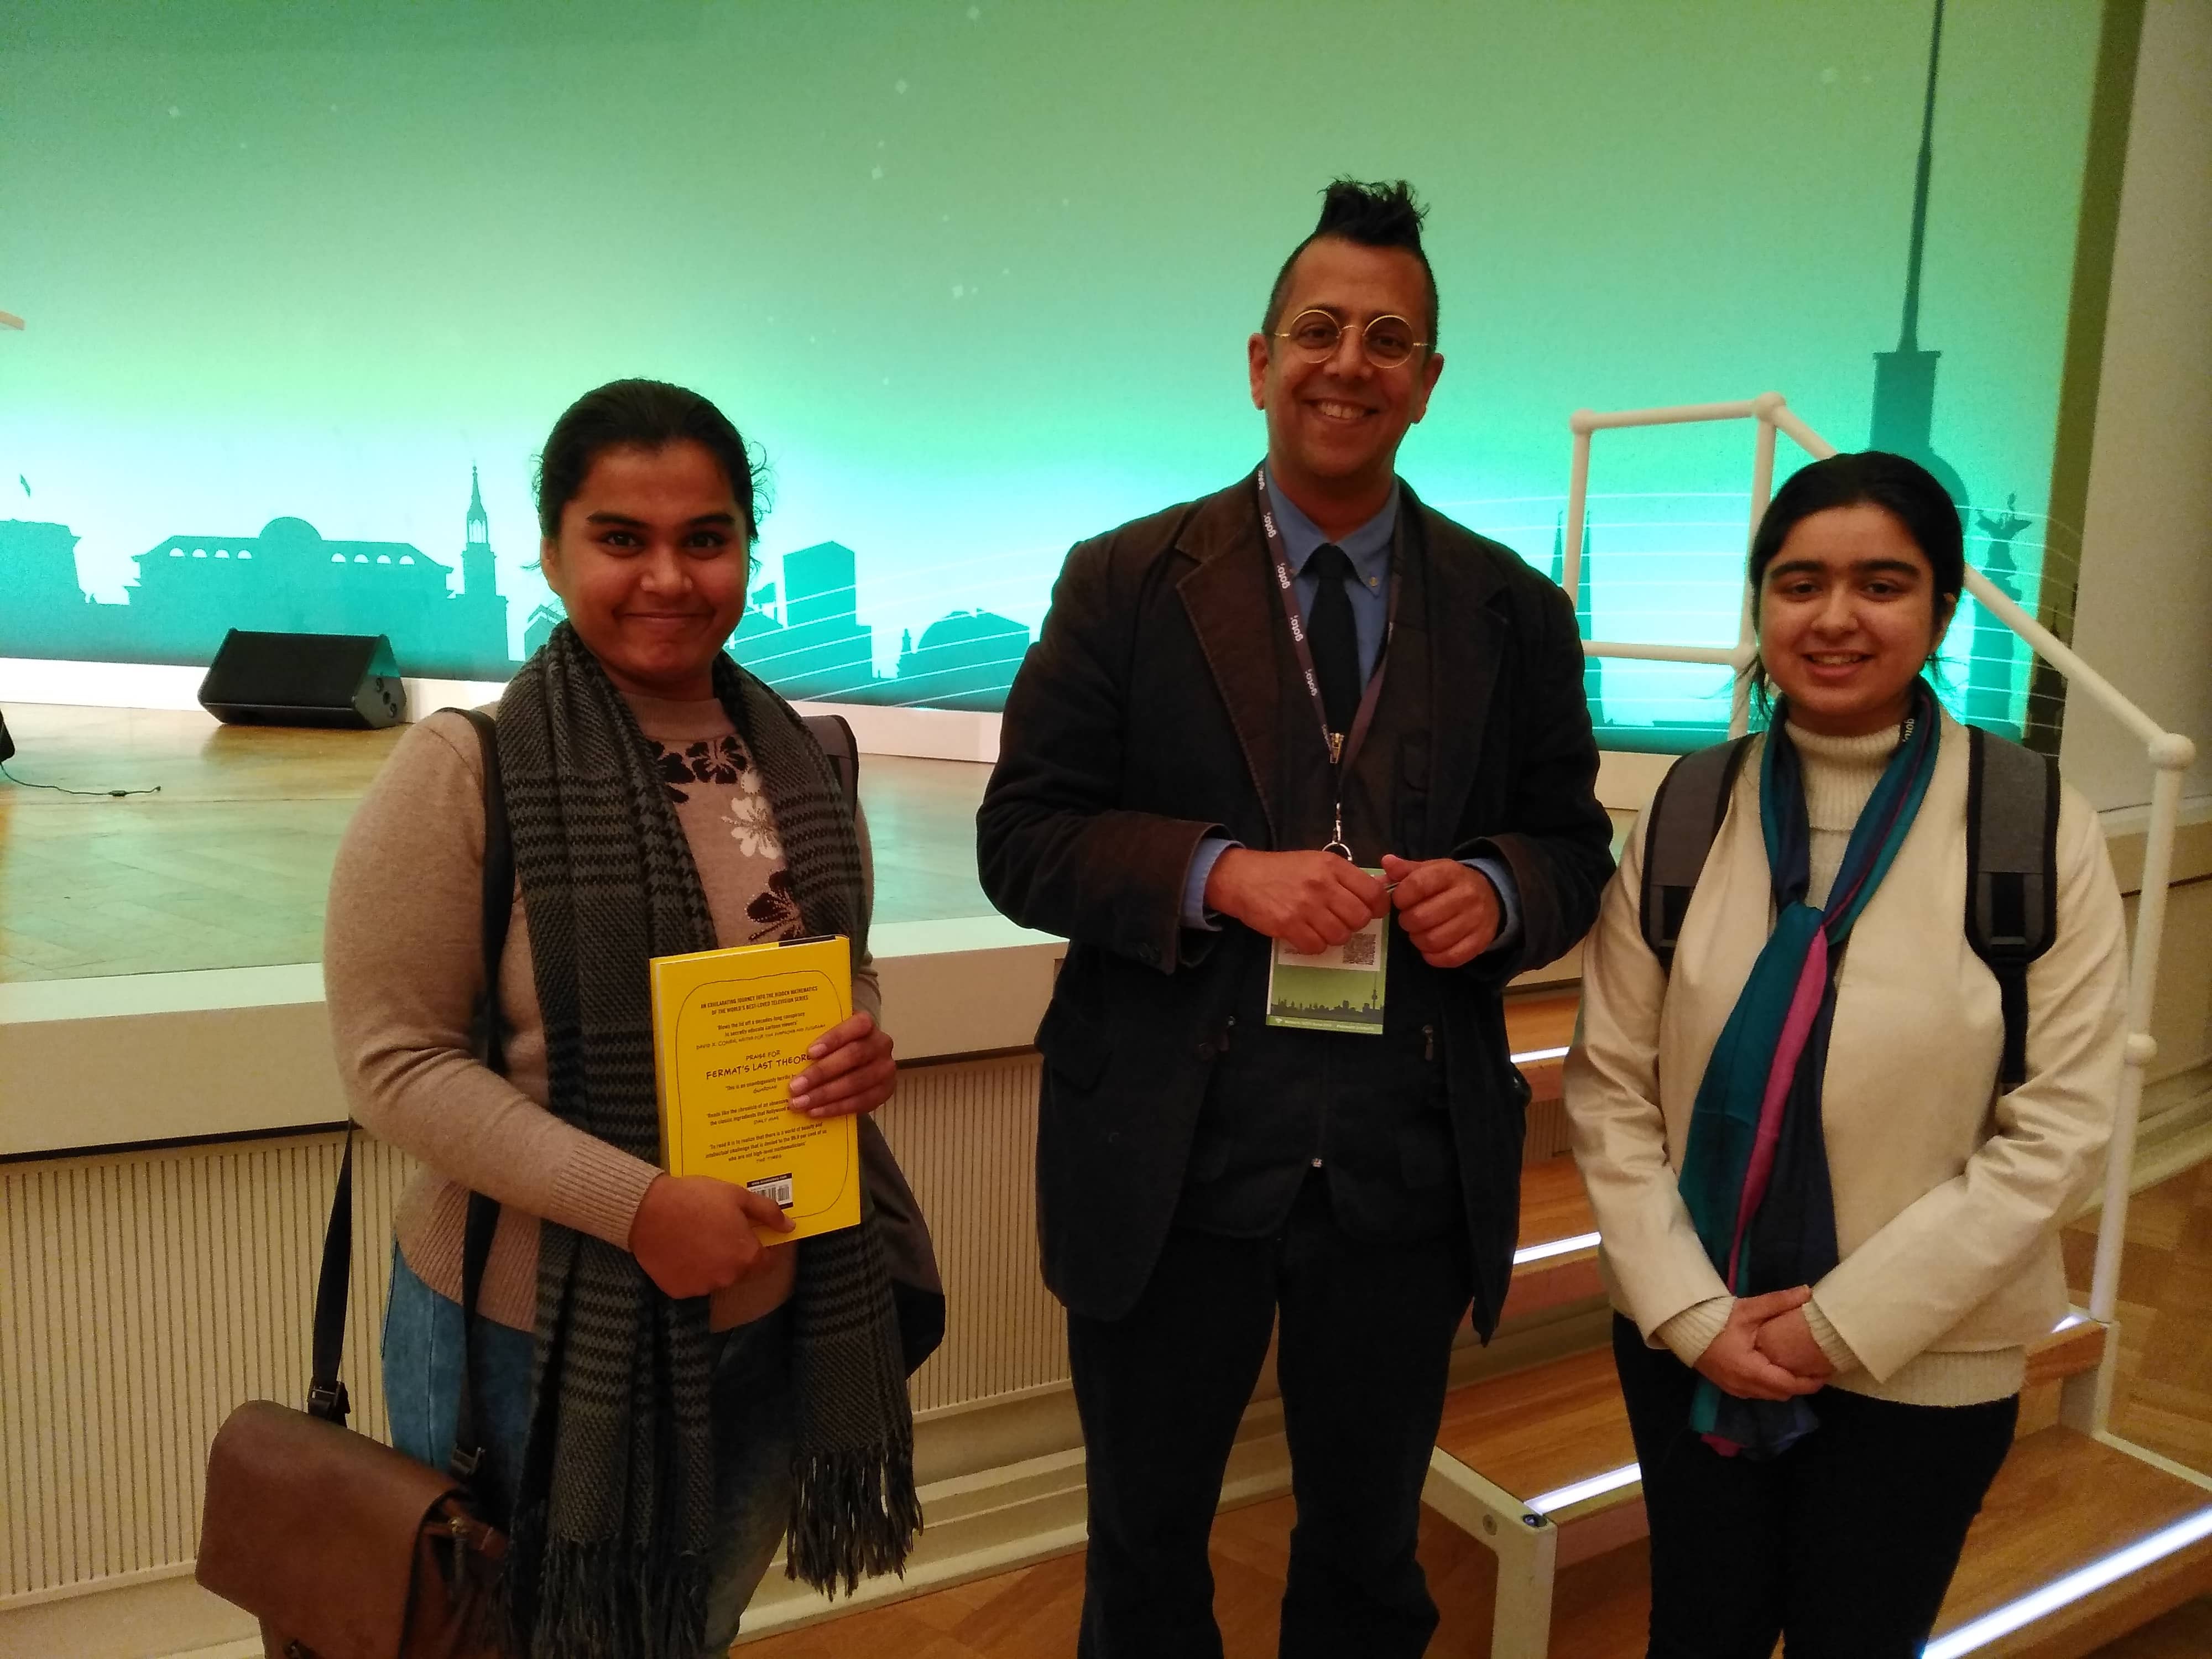 Rupal and Avneet with Simon Singh, a keynote speaker at GOTO Berlin